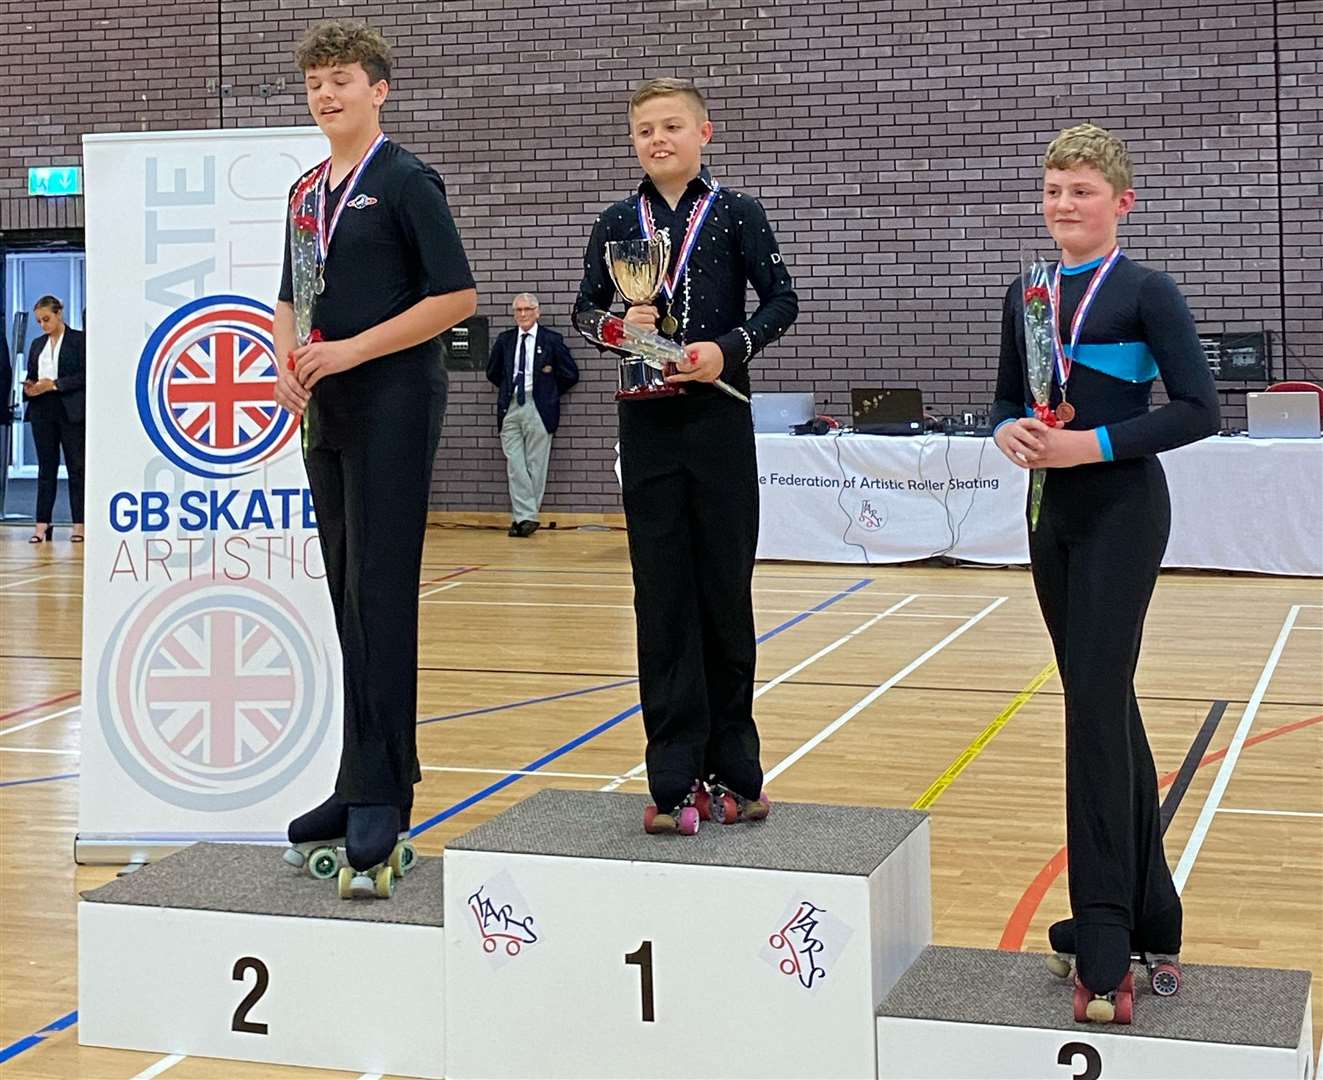 Leo Whiten (left) placed 2nd in the men's solo dance Hope.  Image: Medway Roller Dance